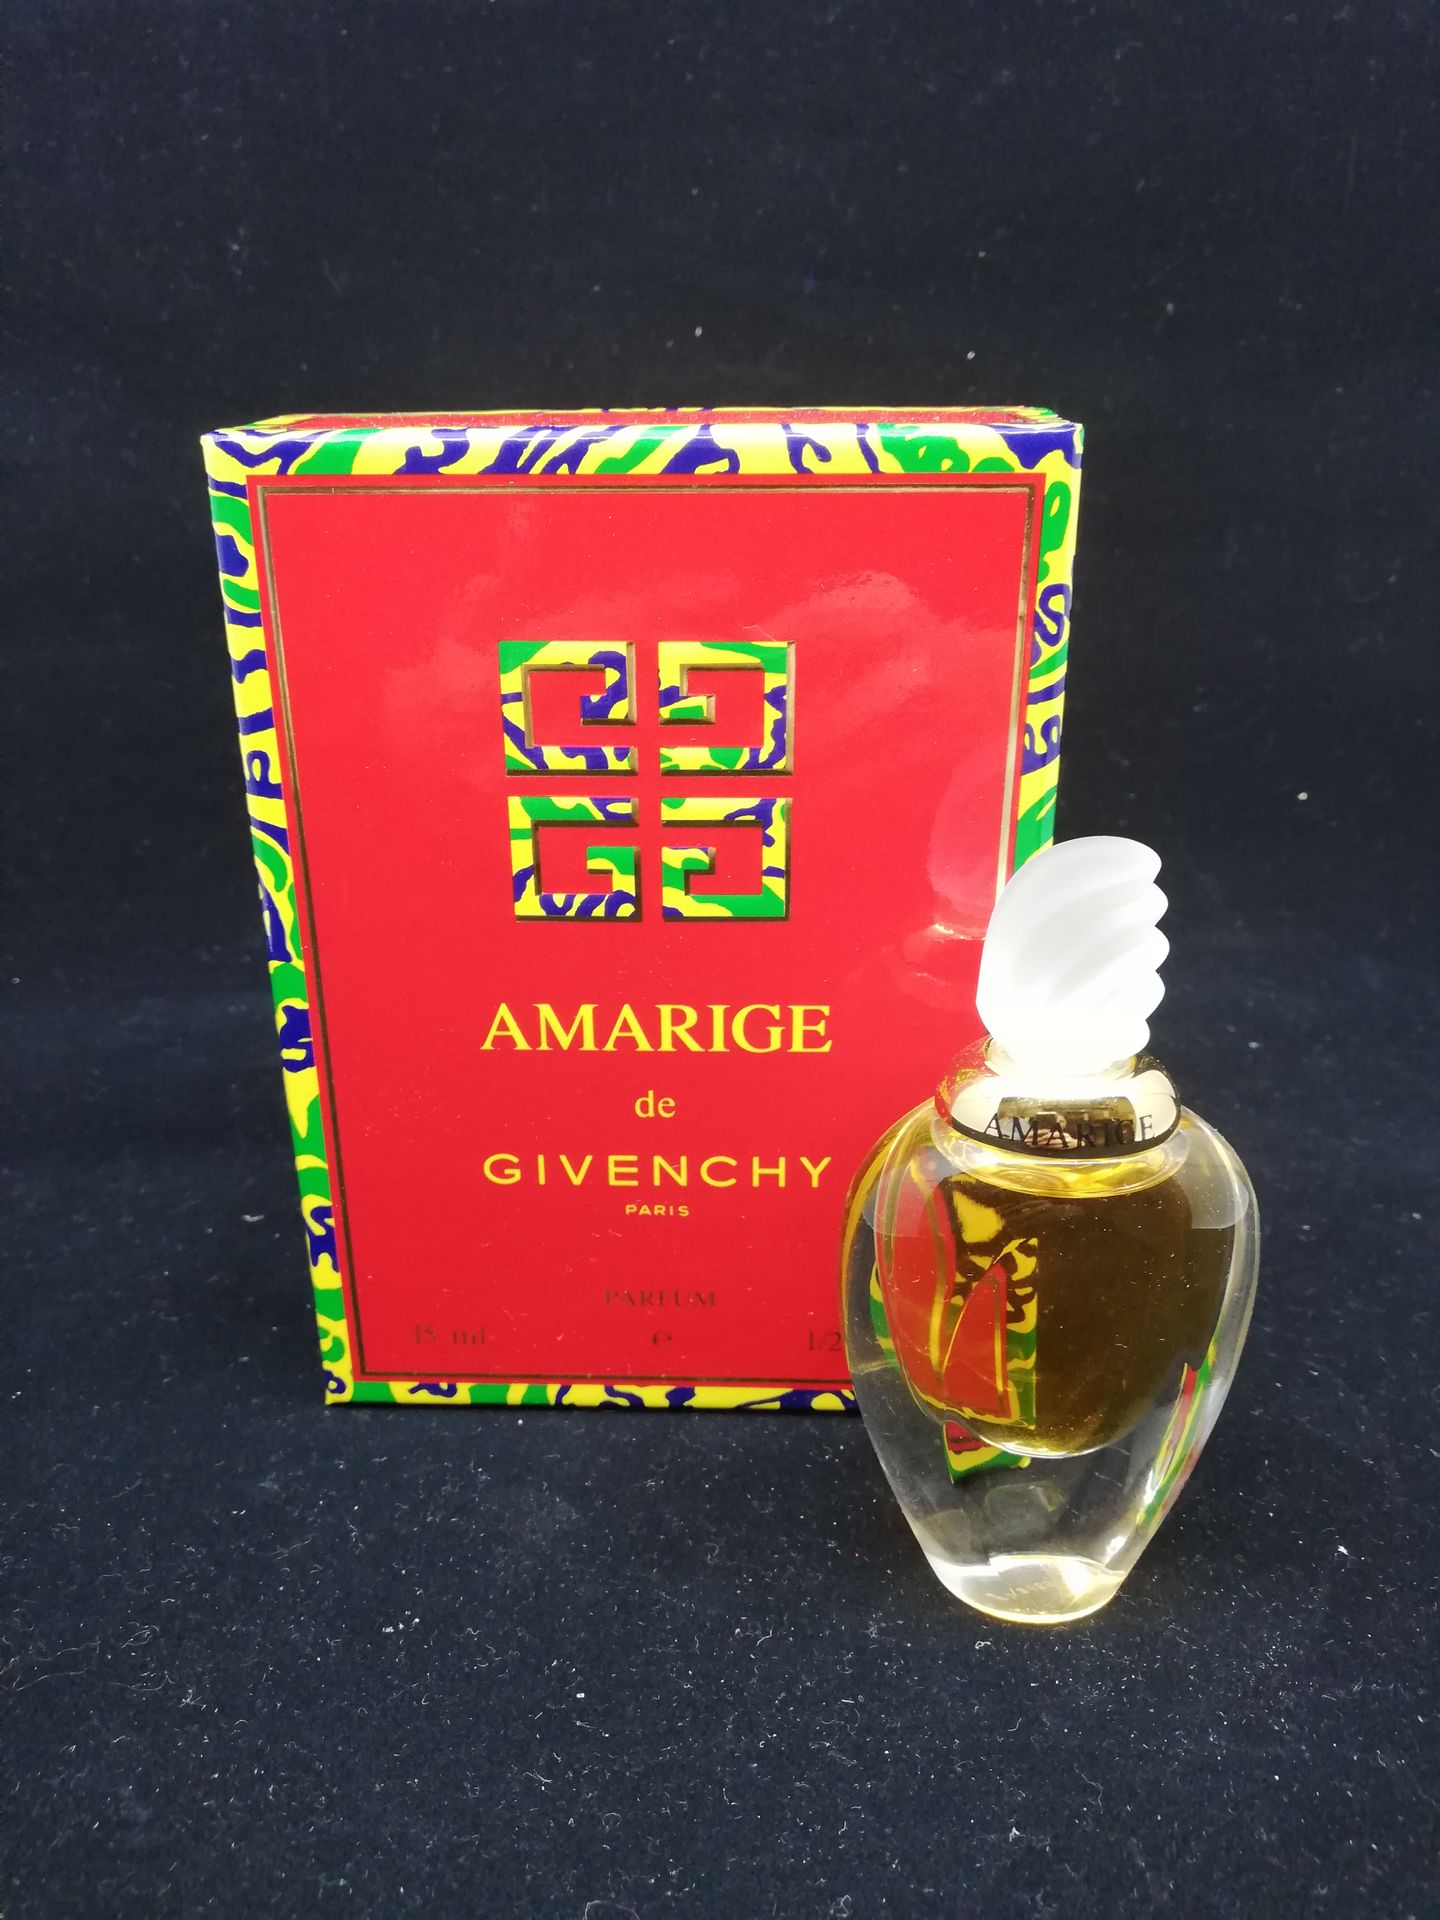 Null Givenchy - "Amarige" - (1991)

Presented in its polychrome titled box, luxu&hellip;